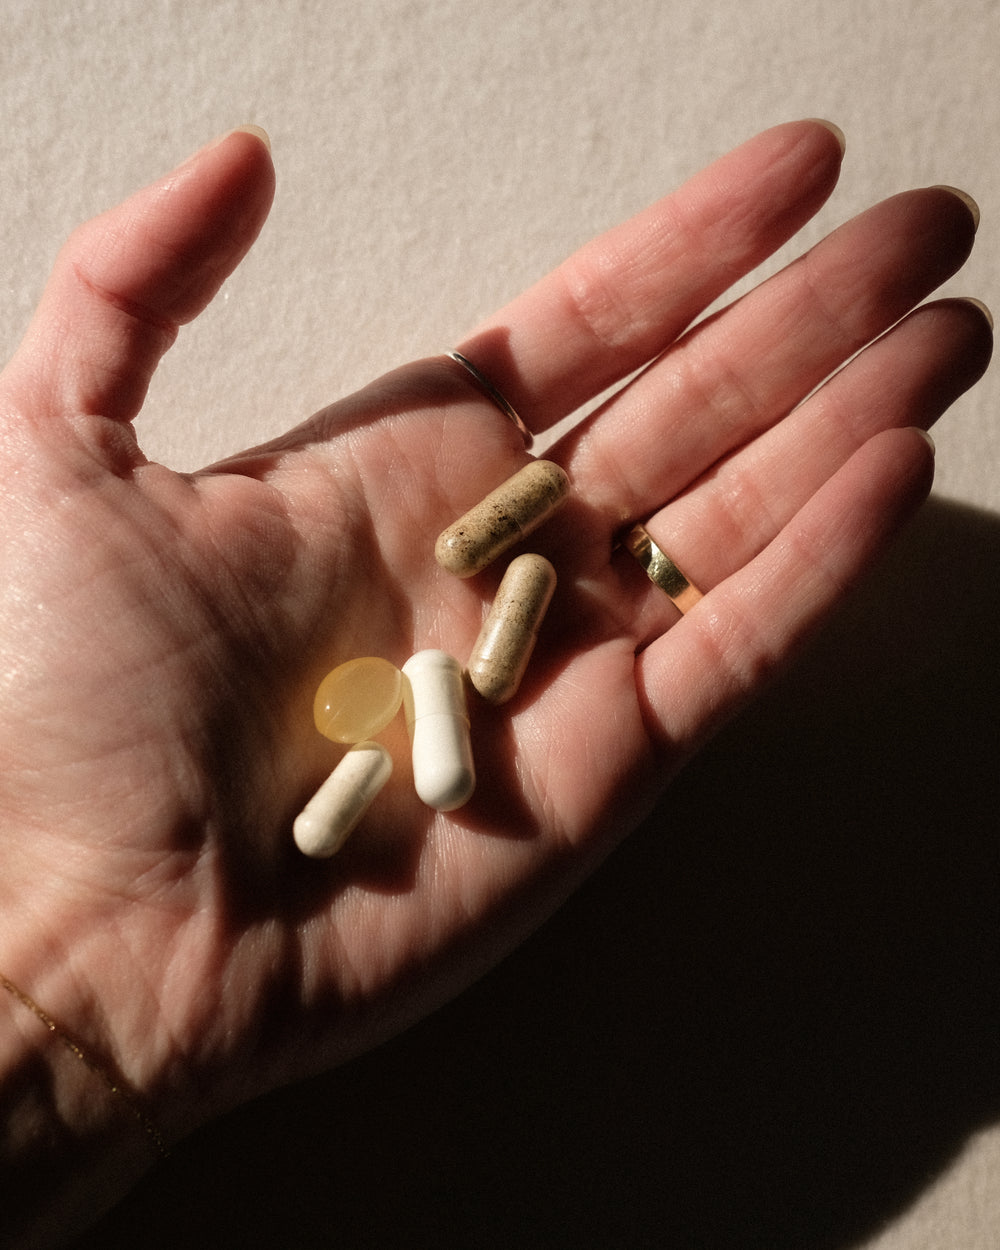 5 Things to Look for in Your Daily Vitamins—and 6 to Avoid